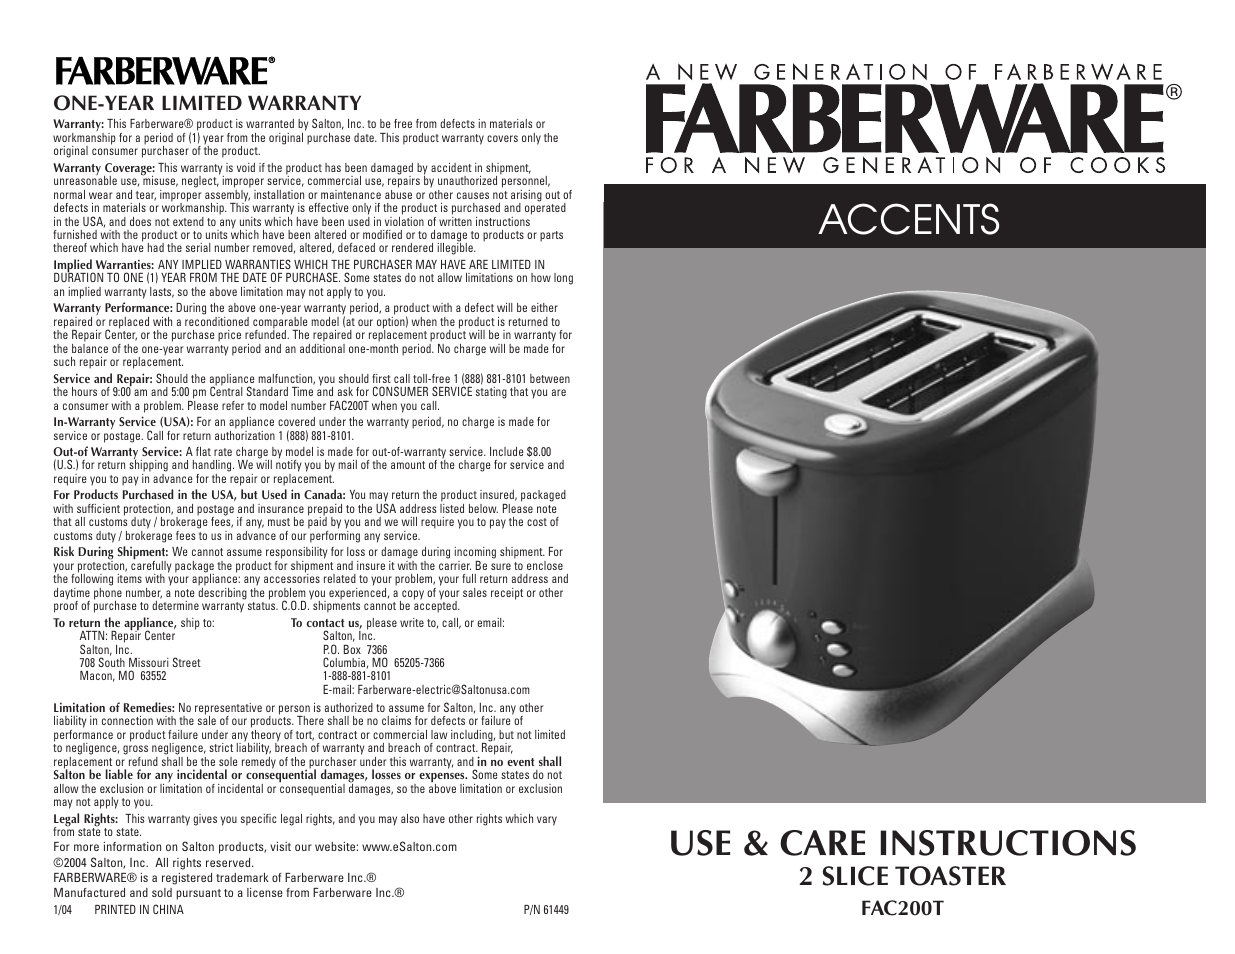 FARBERWARE 2 SLICE TOASTER FAC200T User Manual | 12 pages